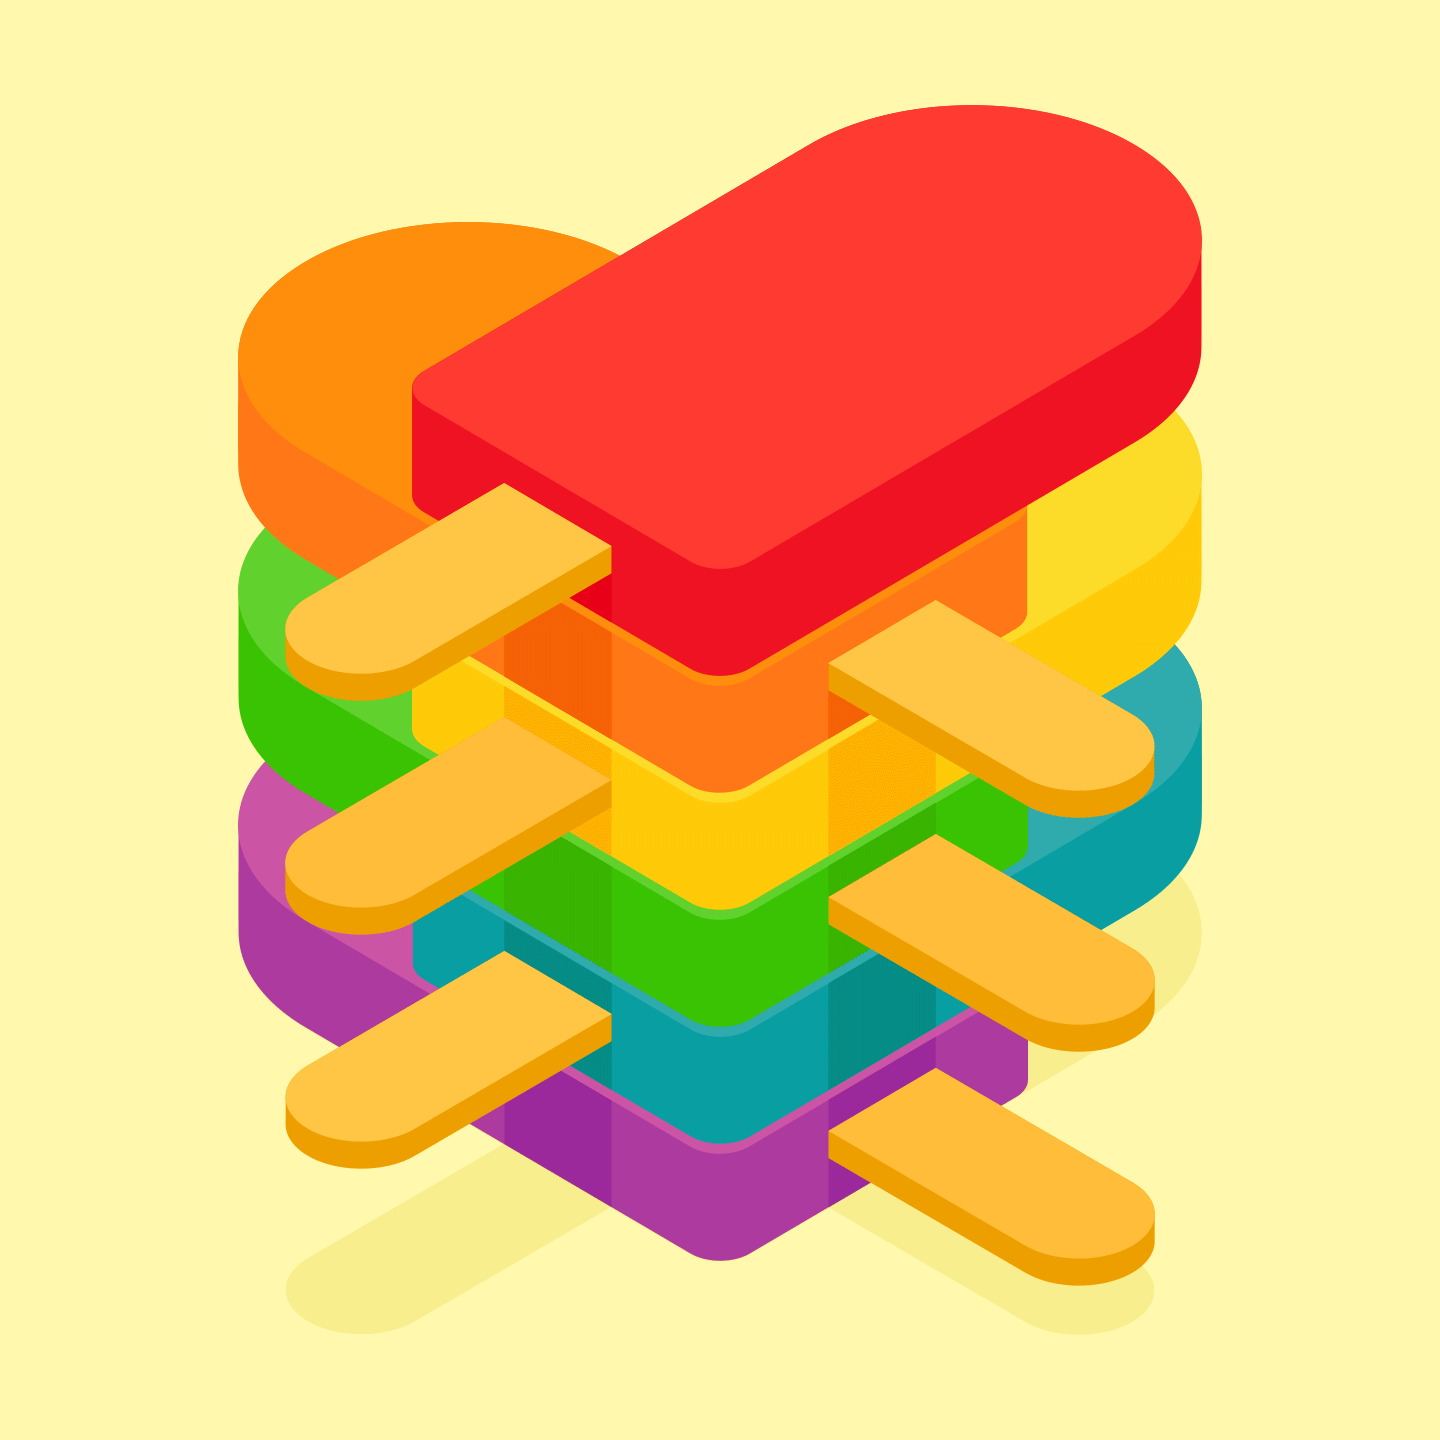 illustration_andre_levy_zhion_vector_isometric_perspective_animation_summer_pride_lgbtq_pride_queer_rainbow_icepops_heartbeat.gif